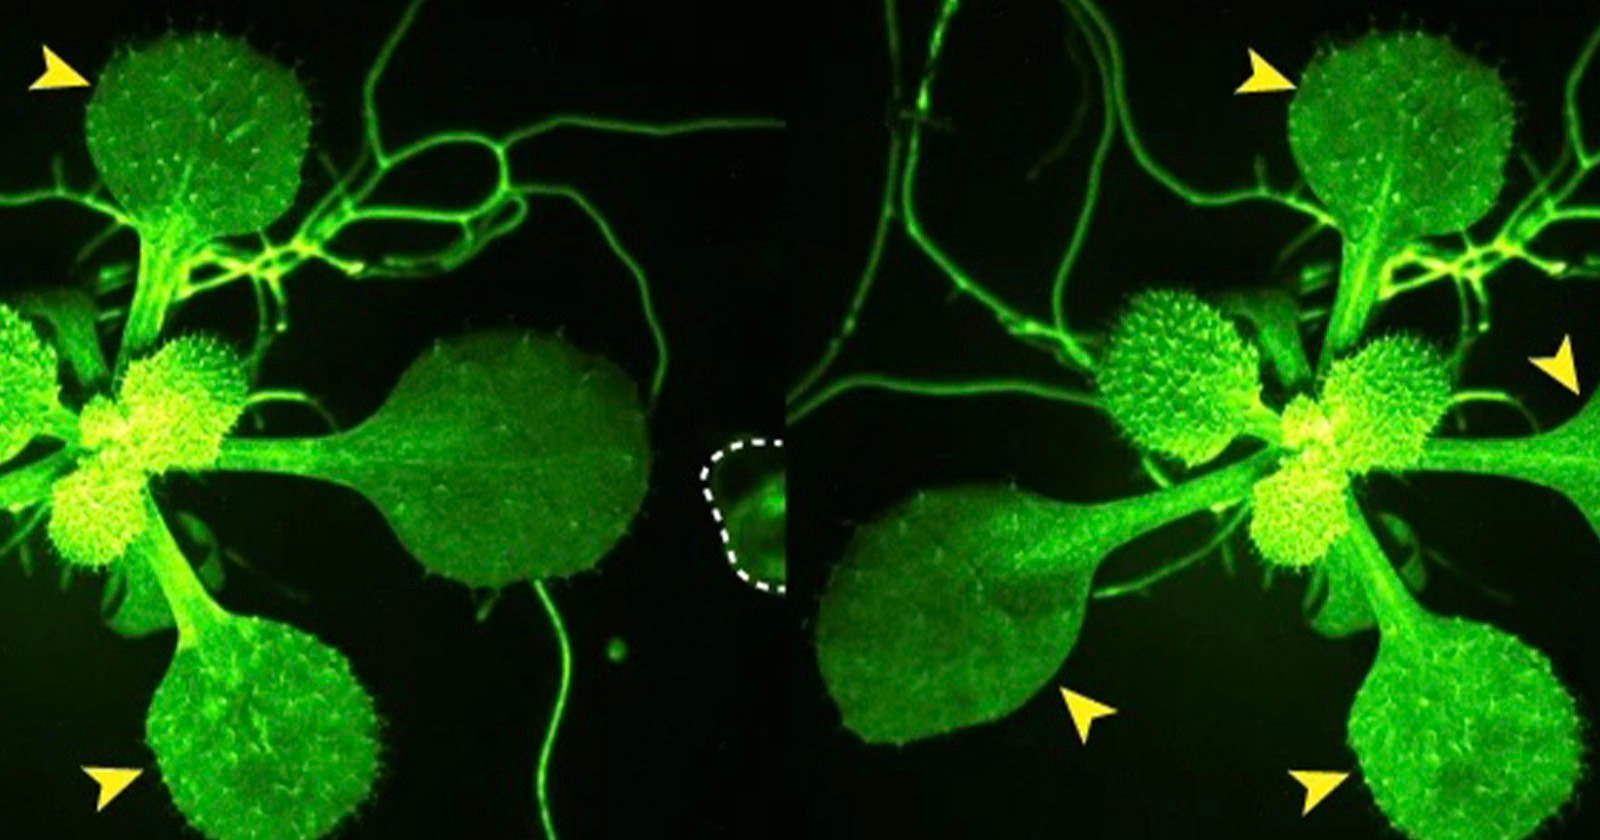 Scientists Film Plants Talking to Each Other in Groundbreaking Footage